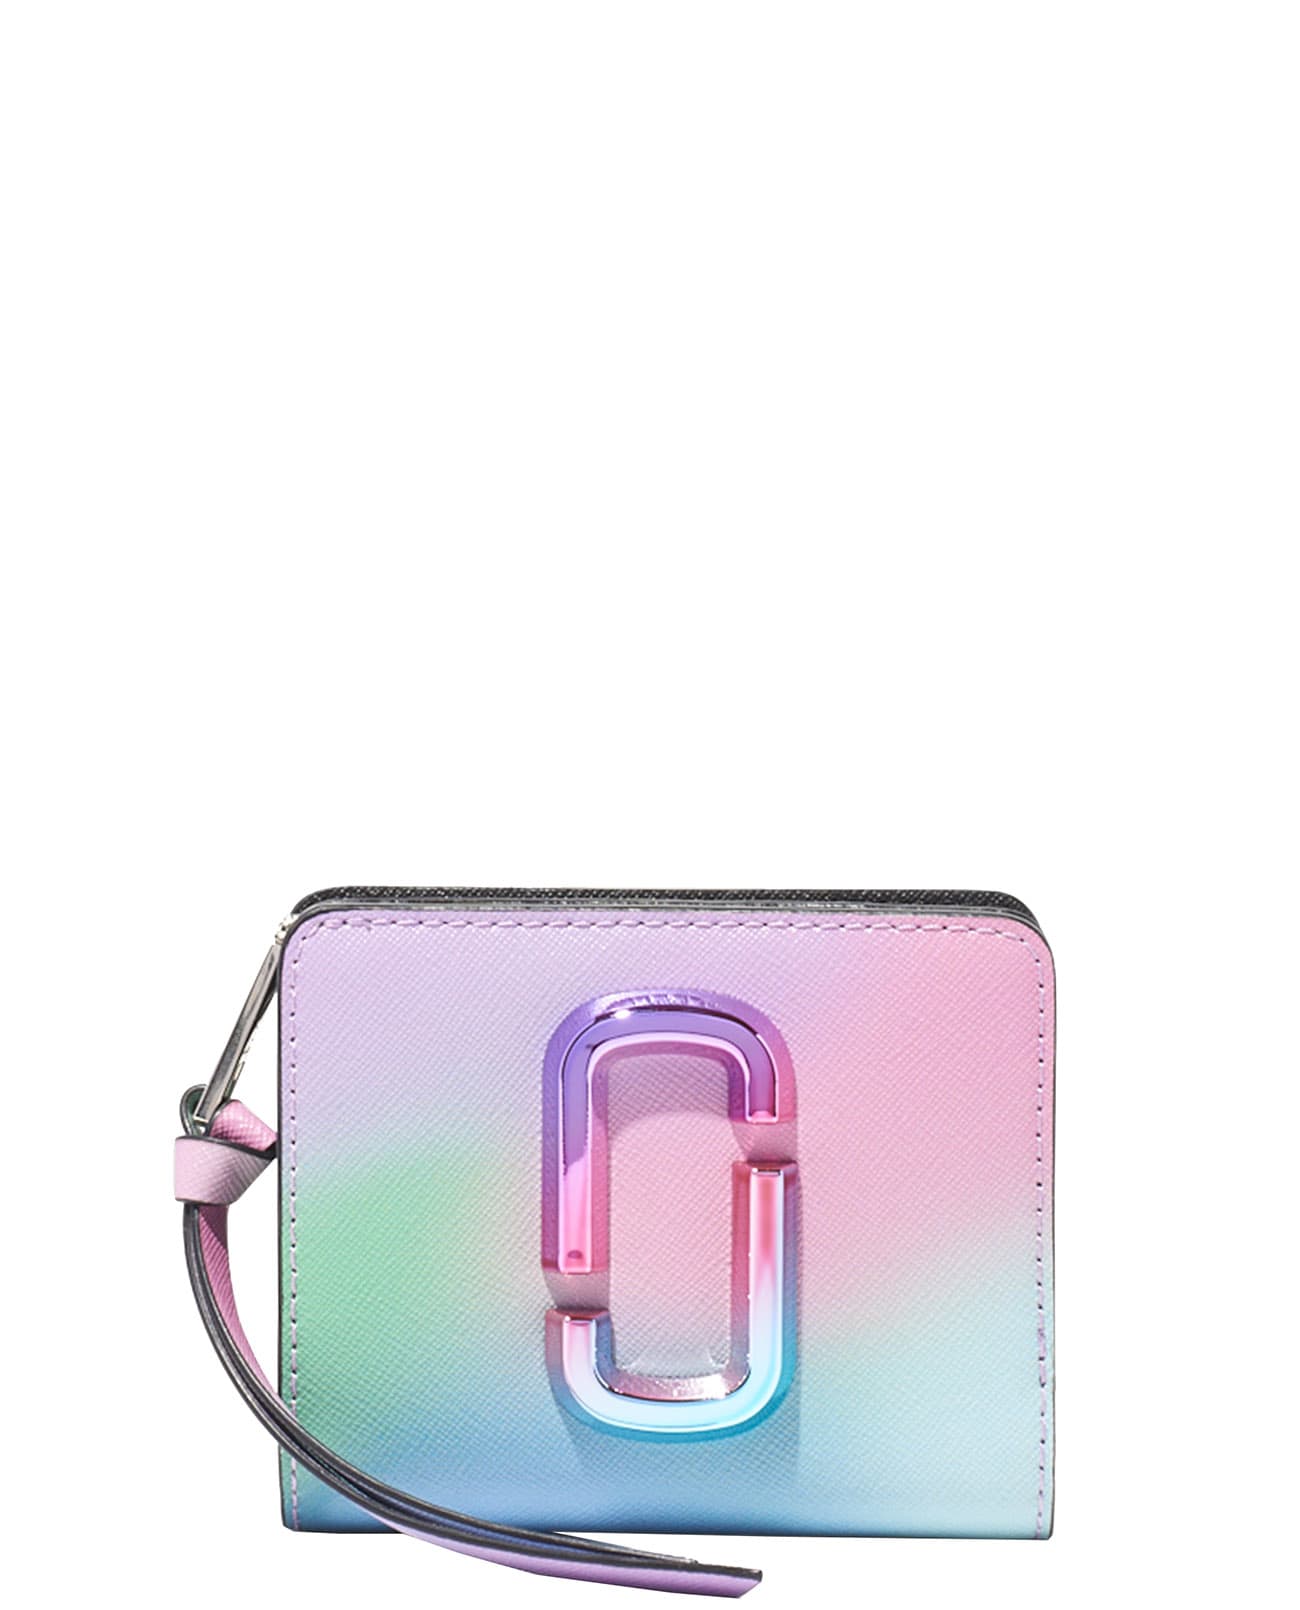 The Marc Jacobs Airbrushed Snapshot Mini Wallet